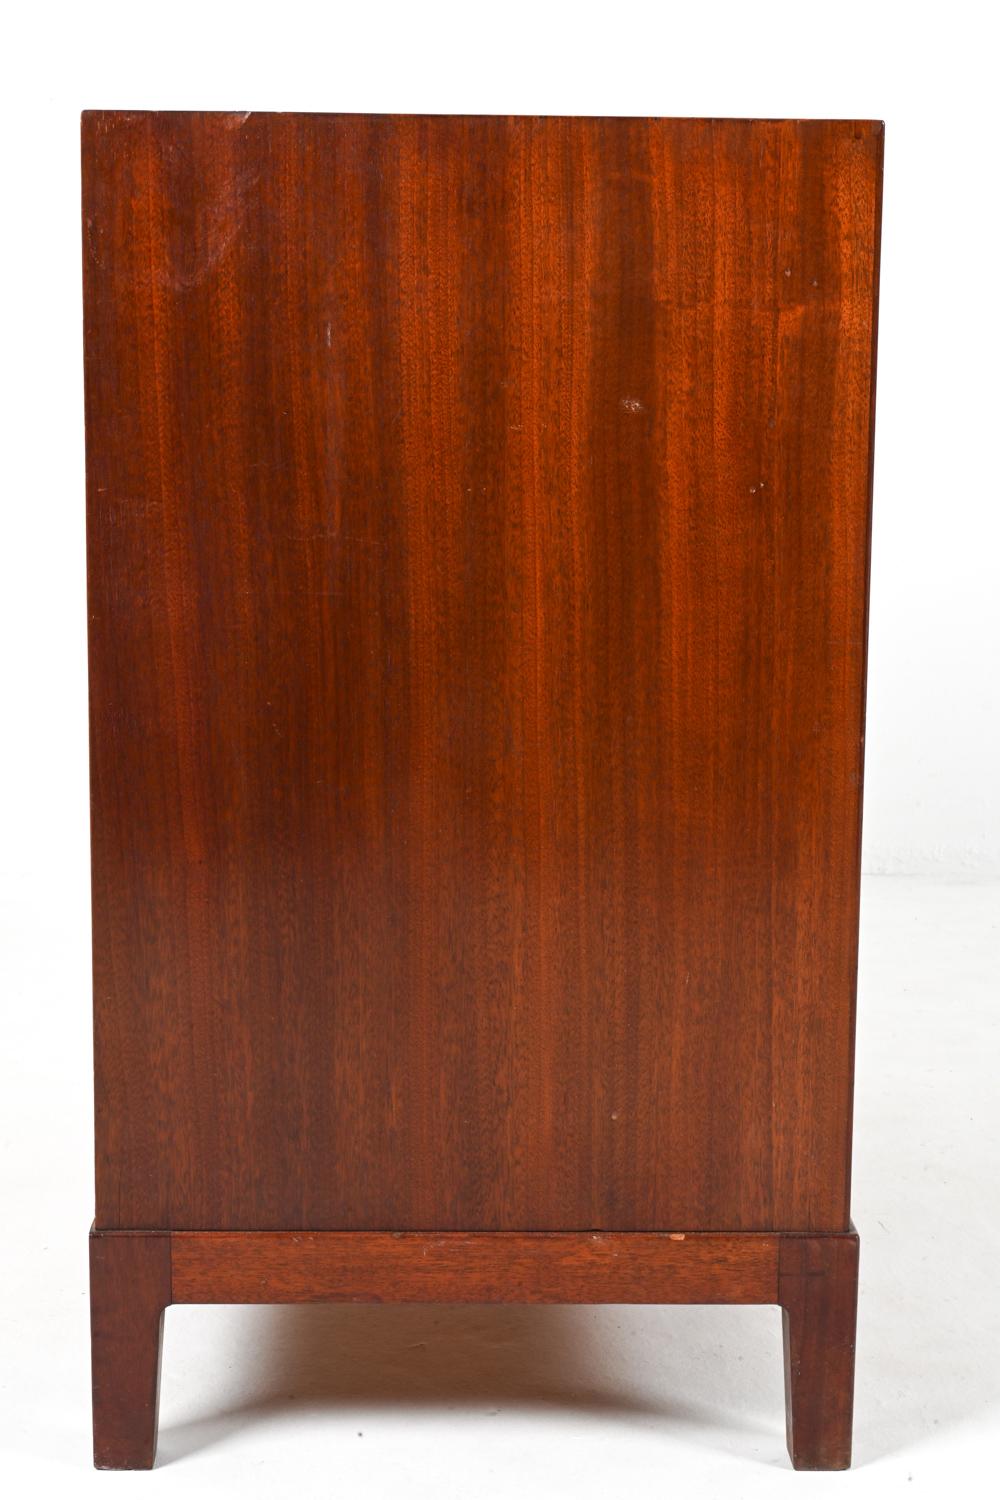 Rare Mahogany Three-Drawer Chest by Ole Wanscher for A. J. Iversen, c. 1940's For Sale 12